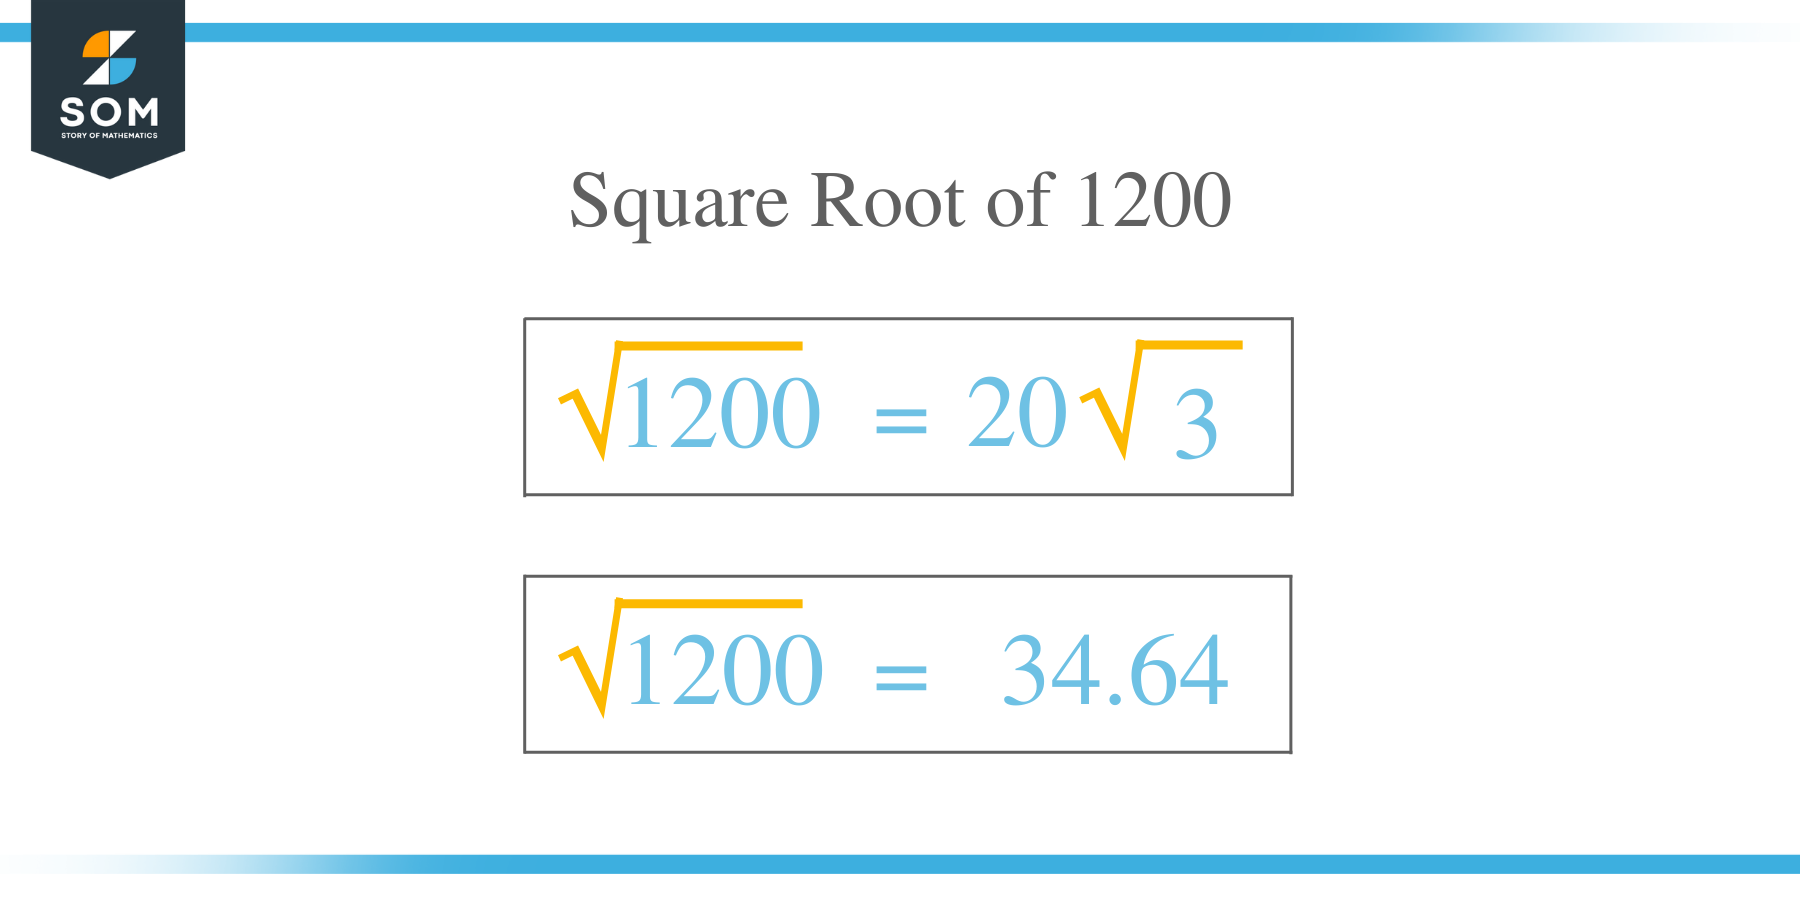 Square Root of 1200